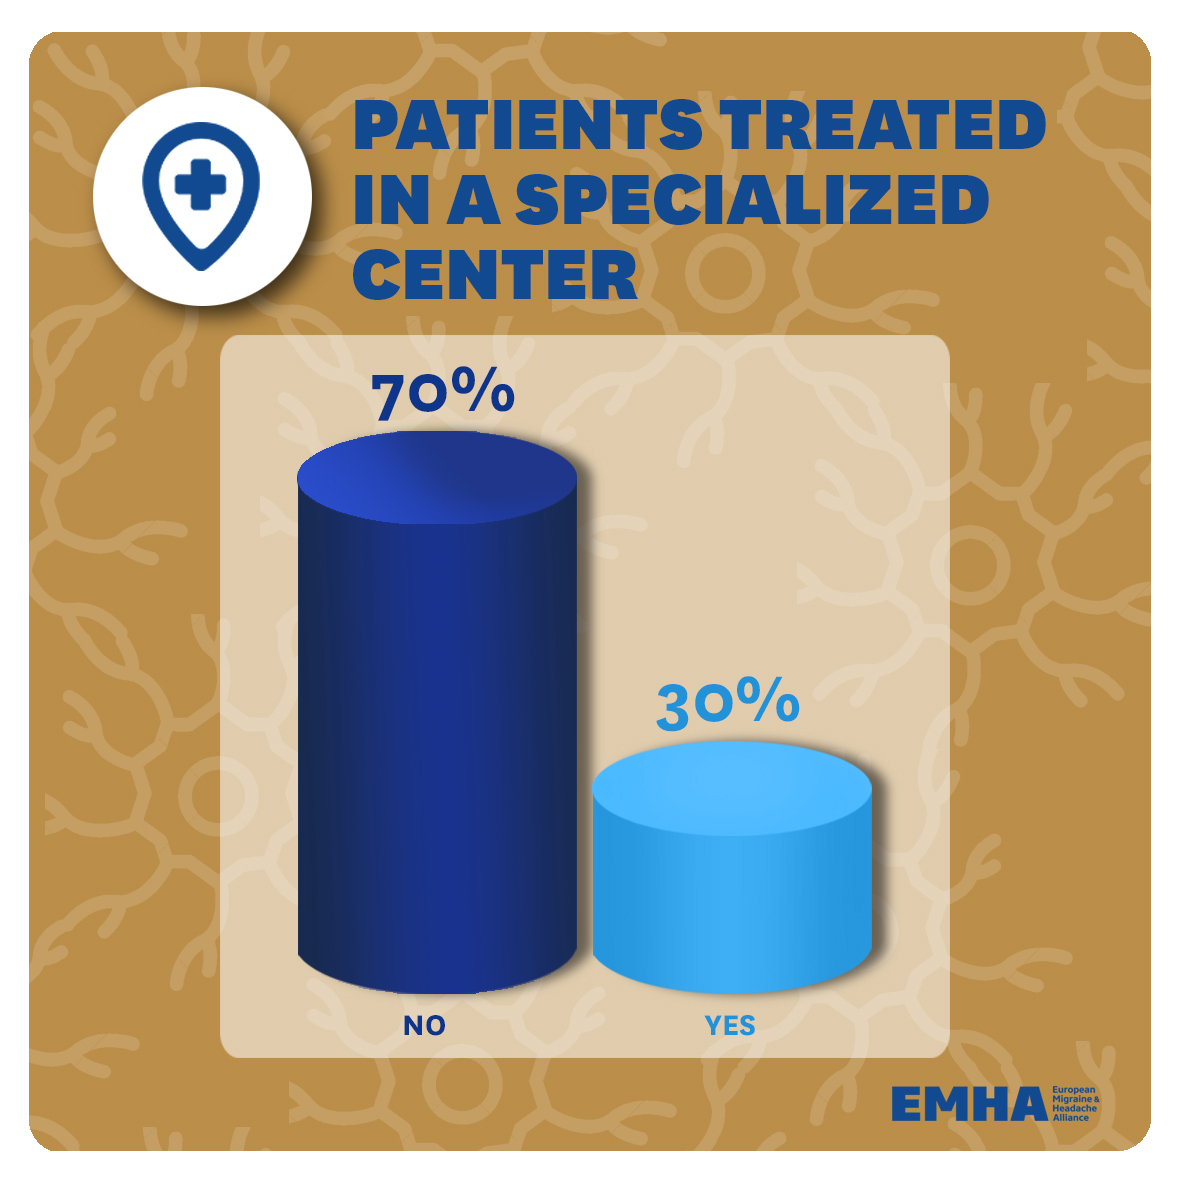 14.-Patients-treated-in-a-center